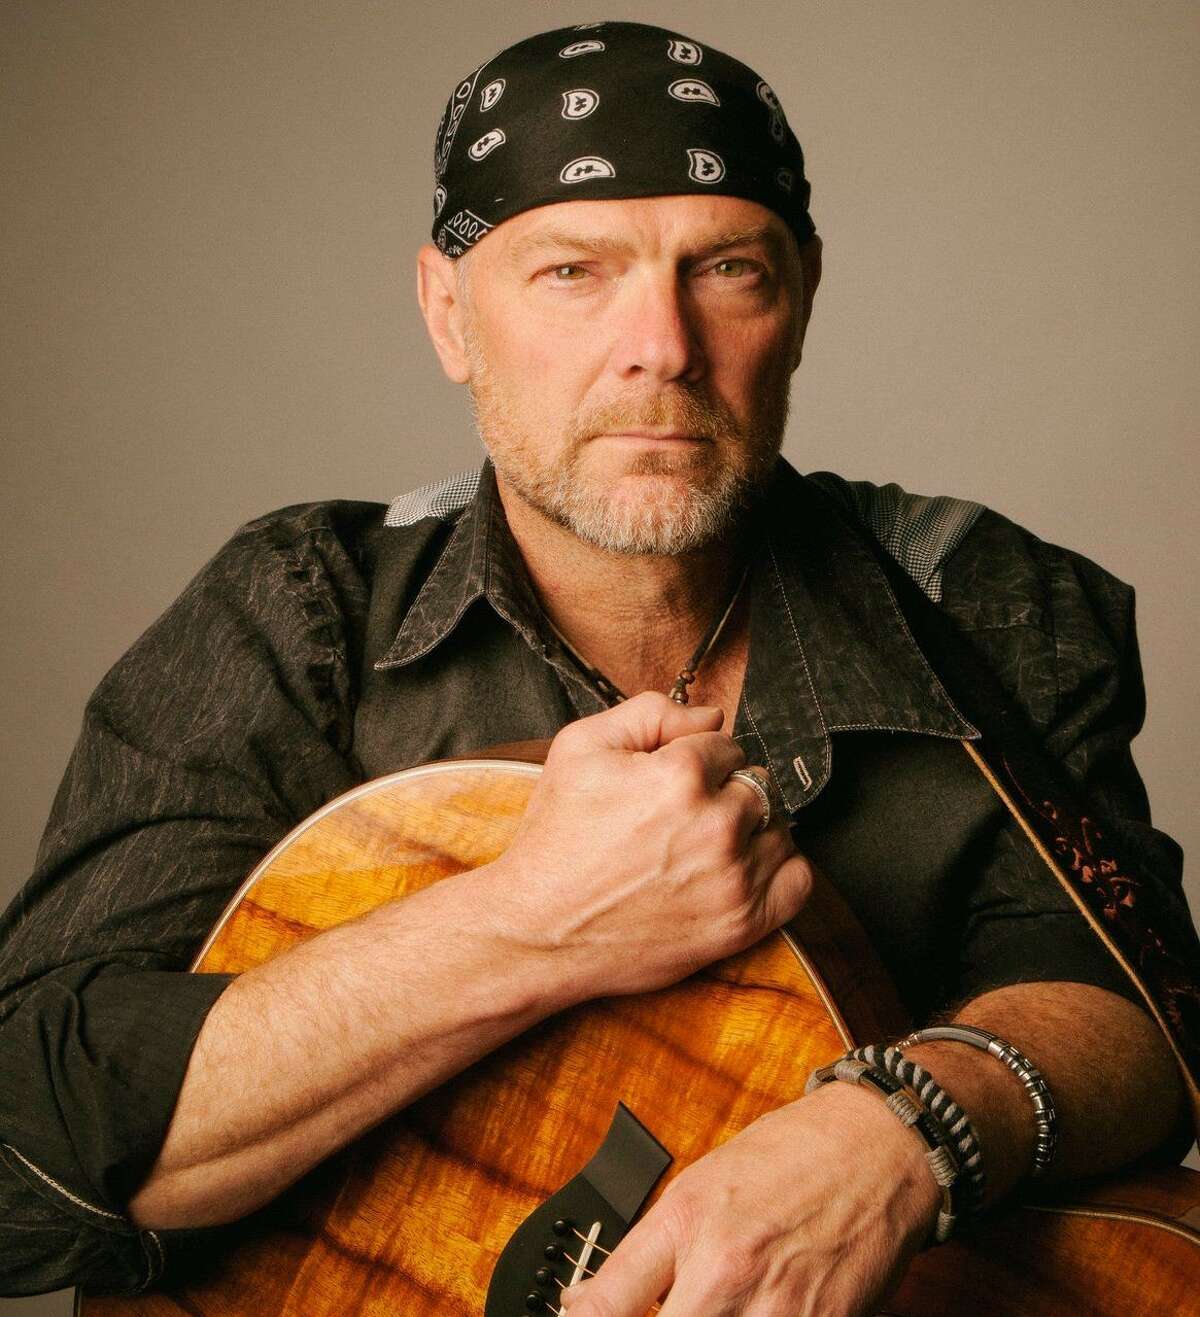 Survivorman Les Stroud is an award-winning film maker, musician and children’s book author. He will be making appearances in Midland and Saginaw on Saturday, October 1.